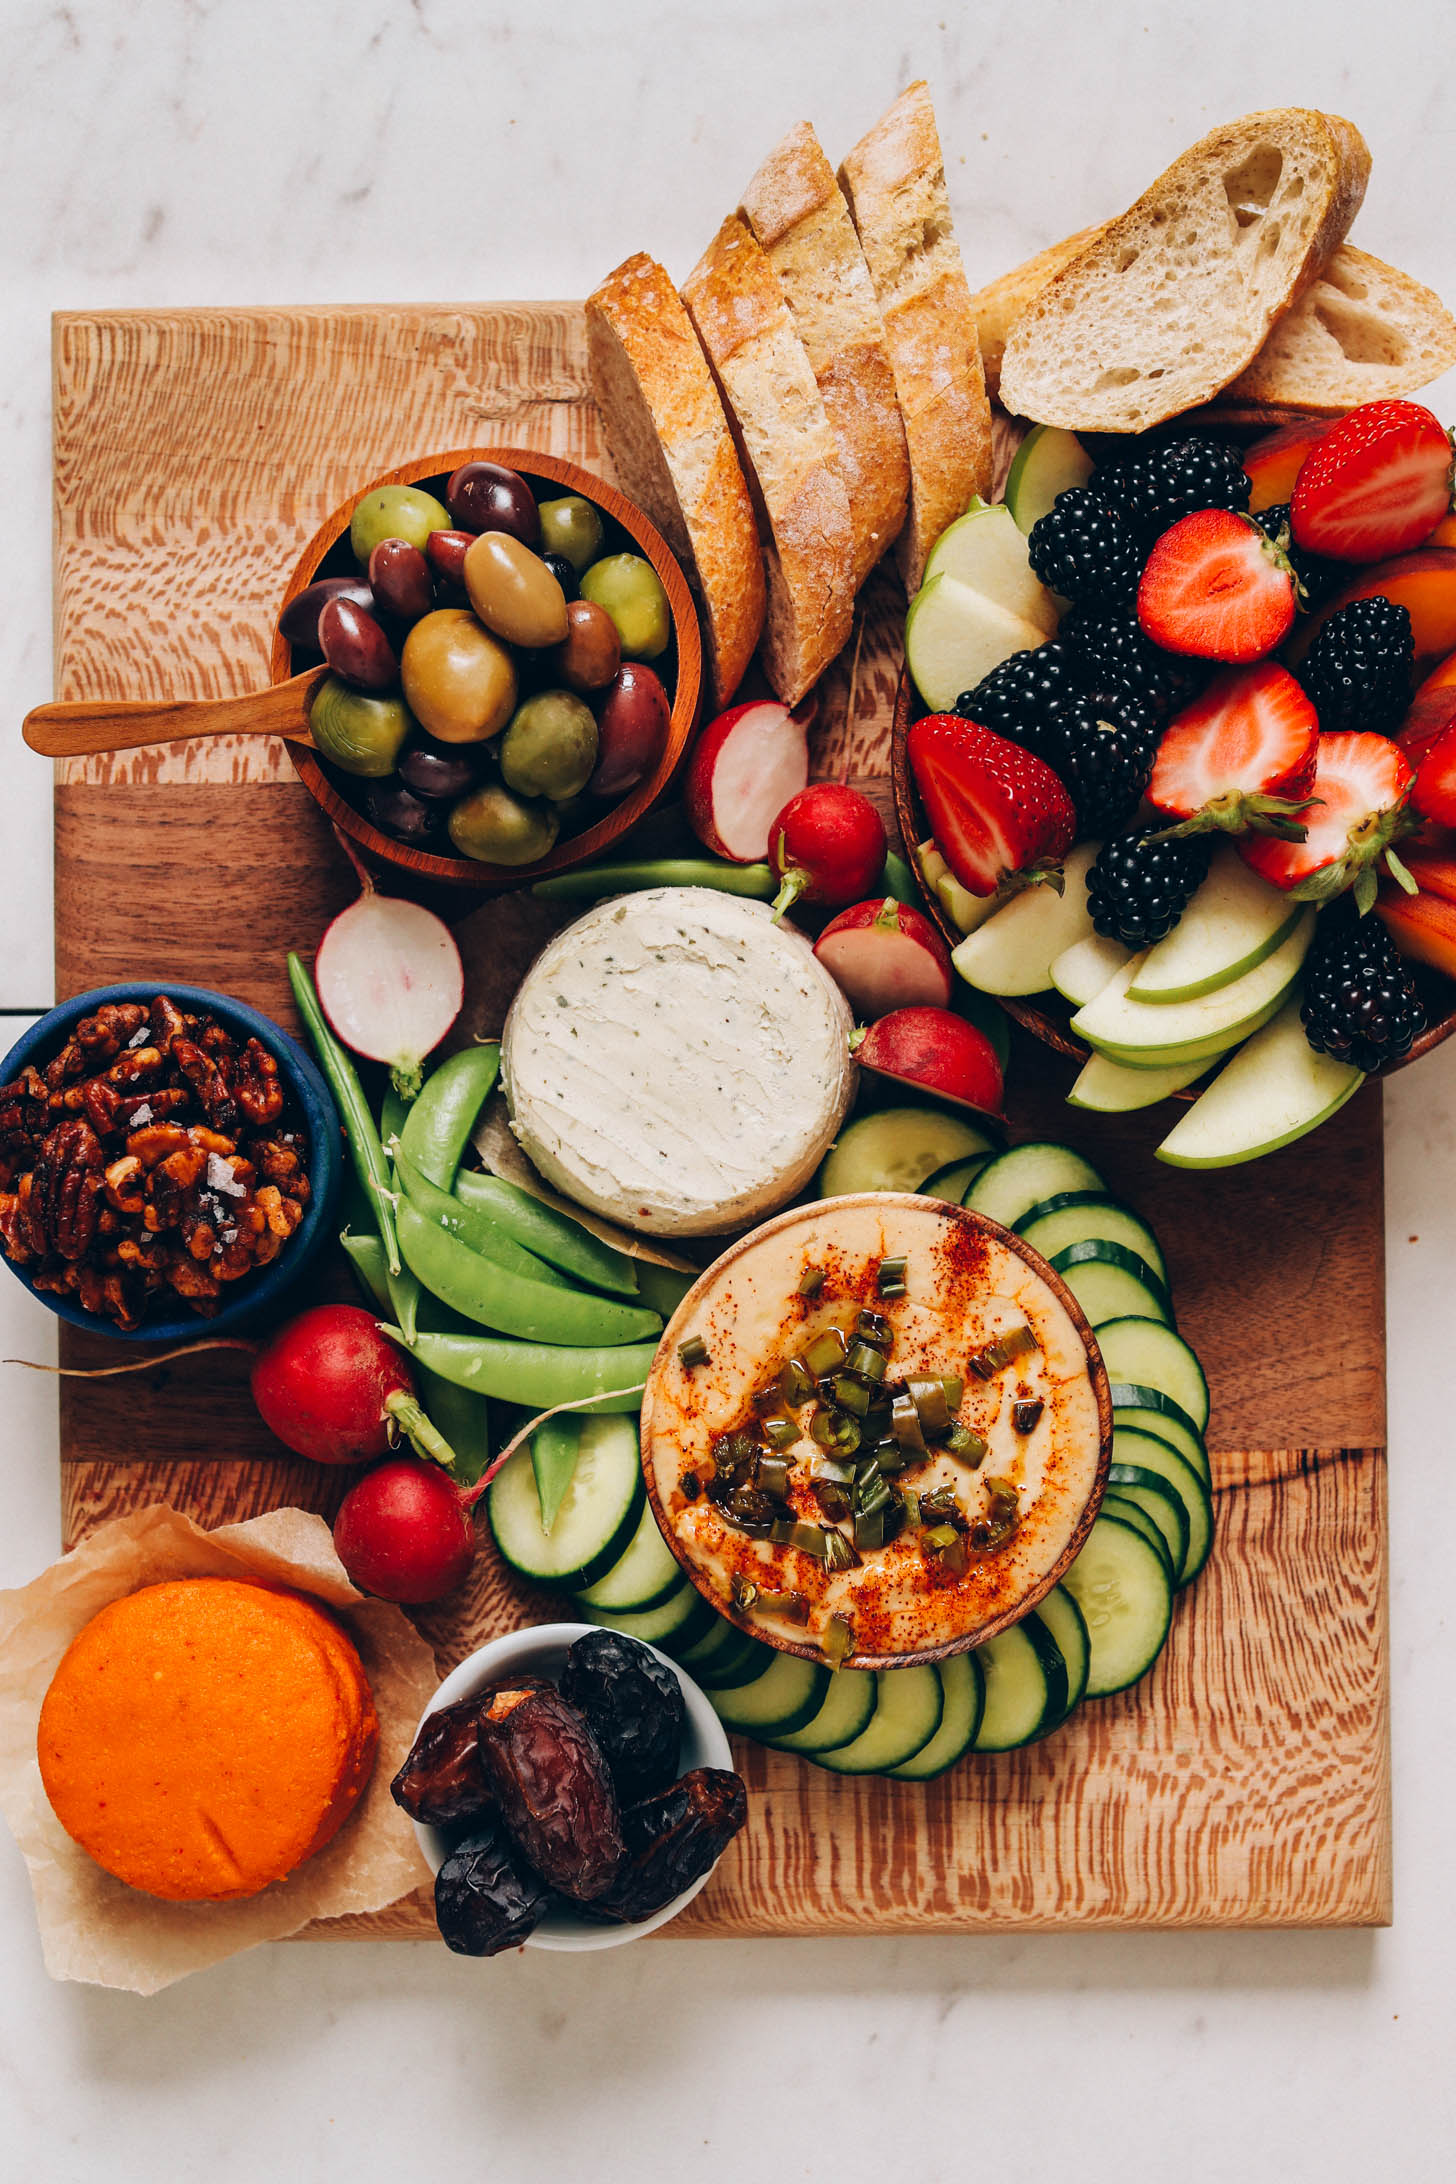 Fresh fruits and veggies assembled on a cutting board around a dip, vegan cheese, and olives